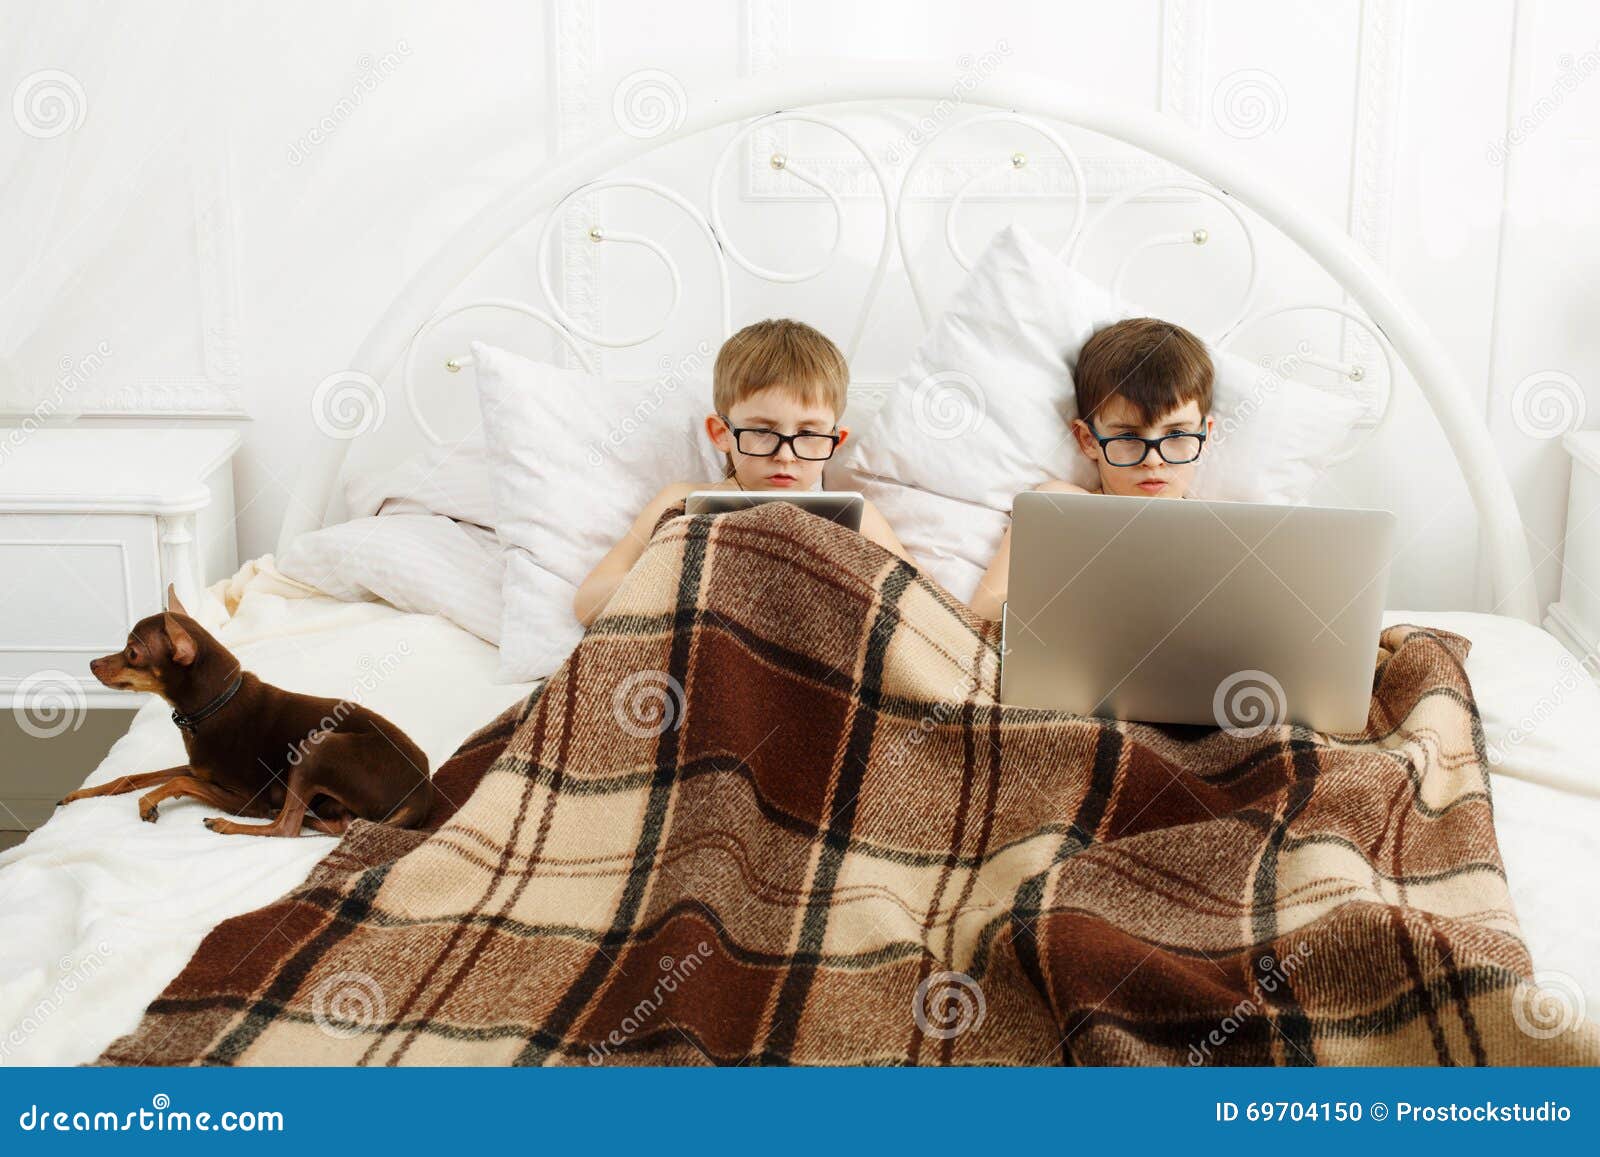 boys play bed